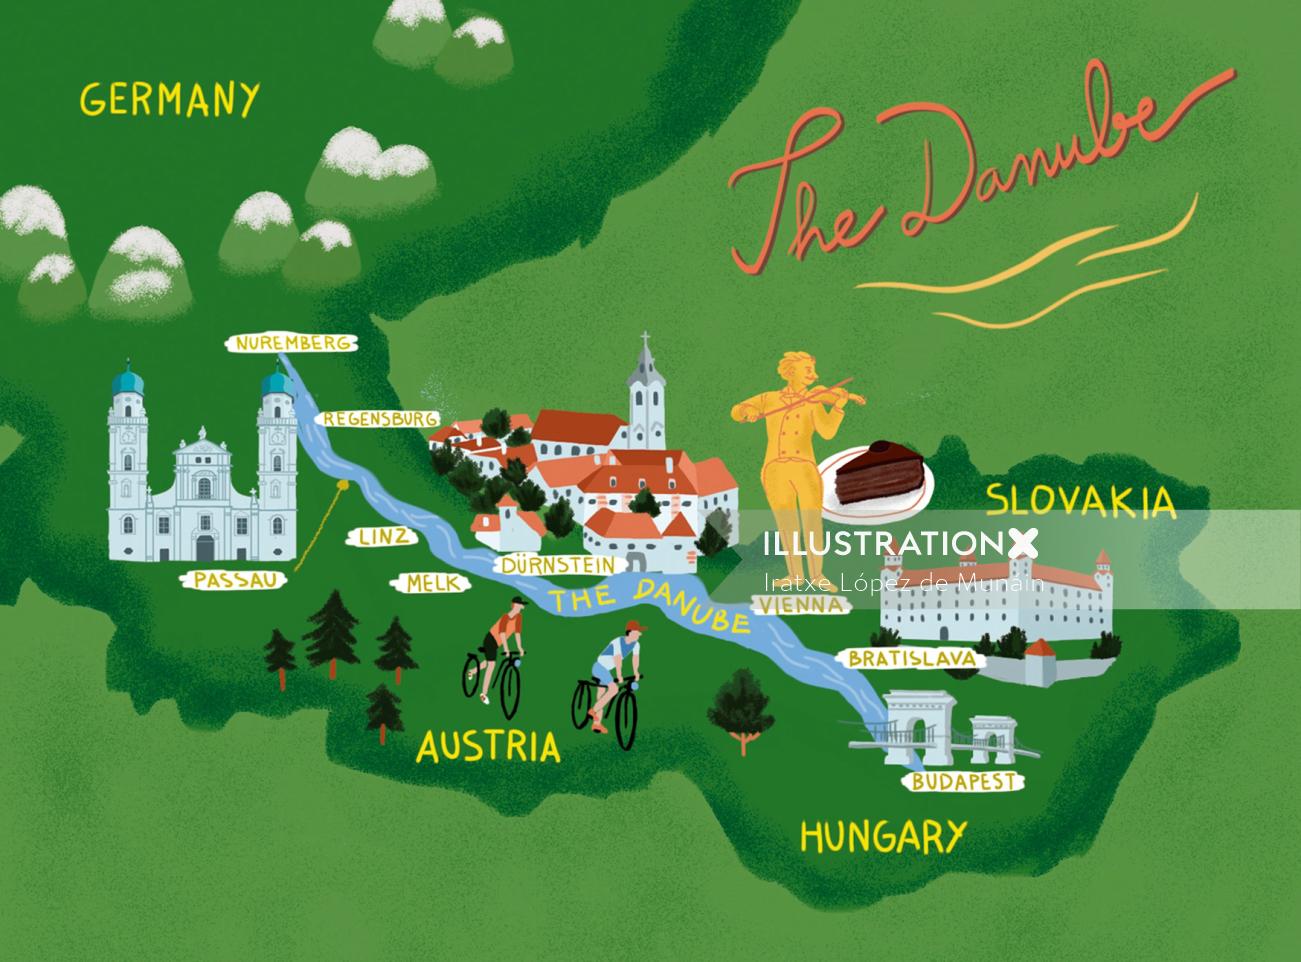 The Danube map for The Chelsea Magazine UK